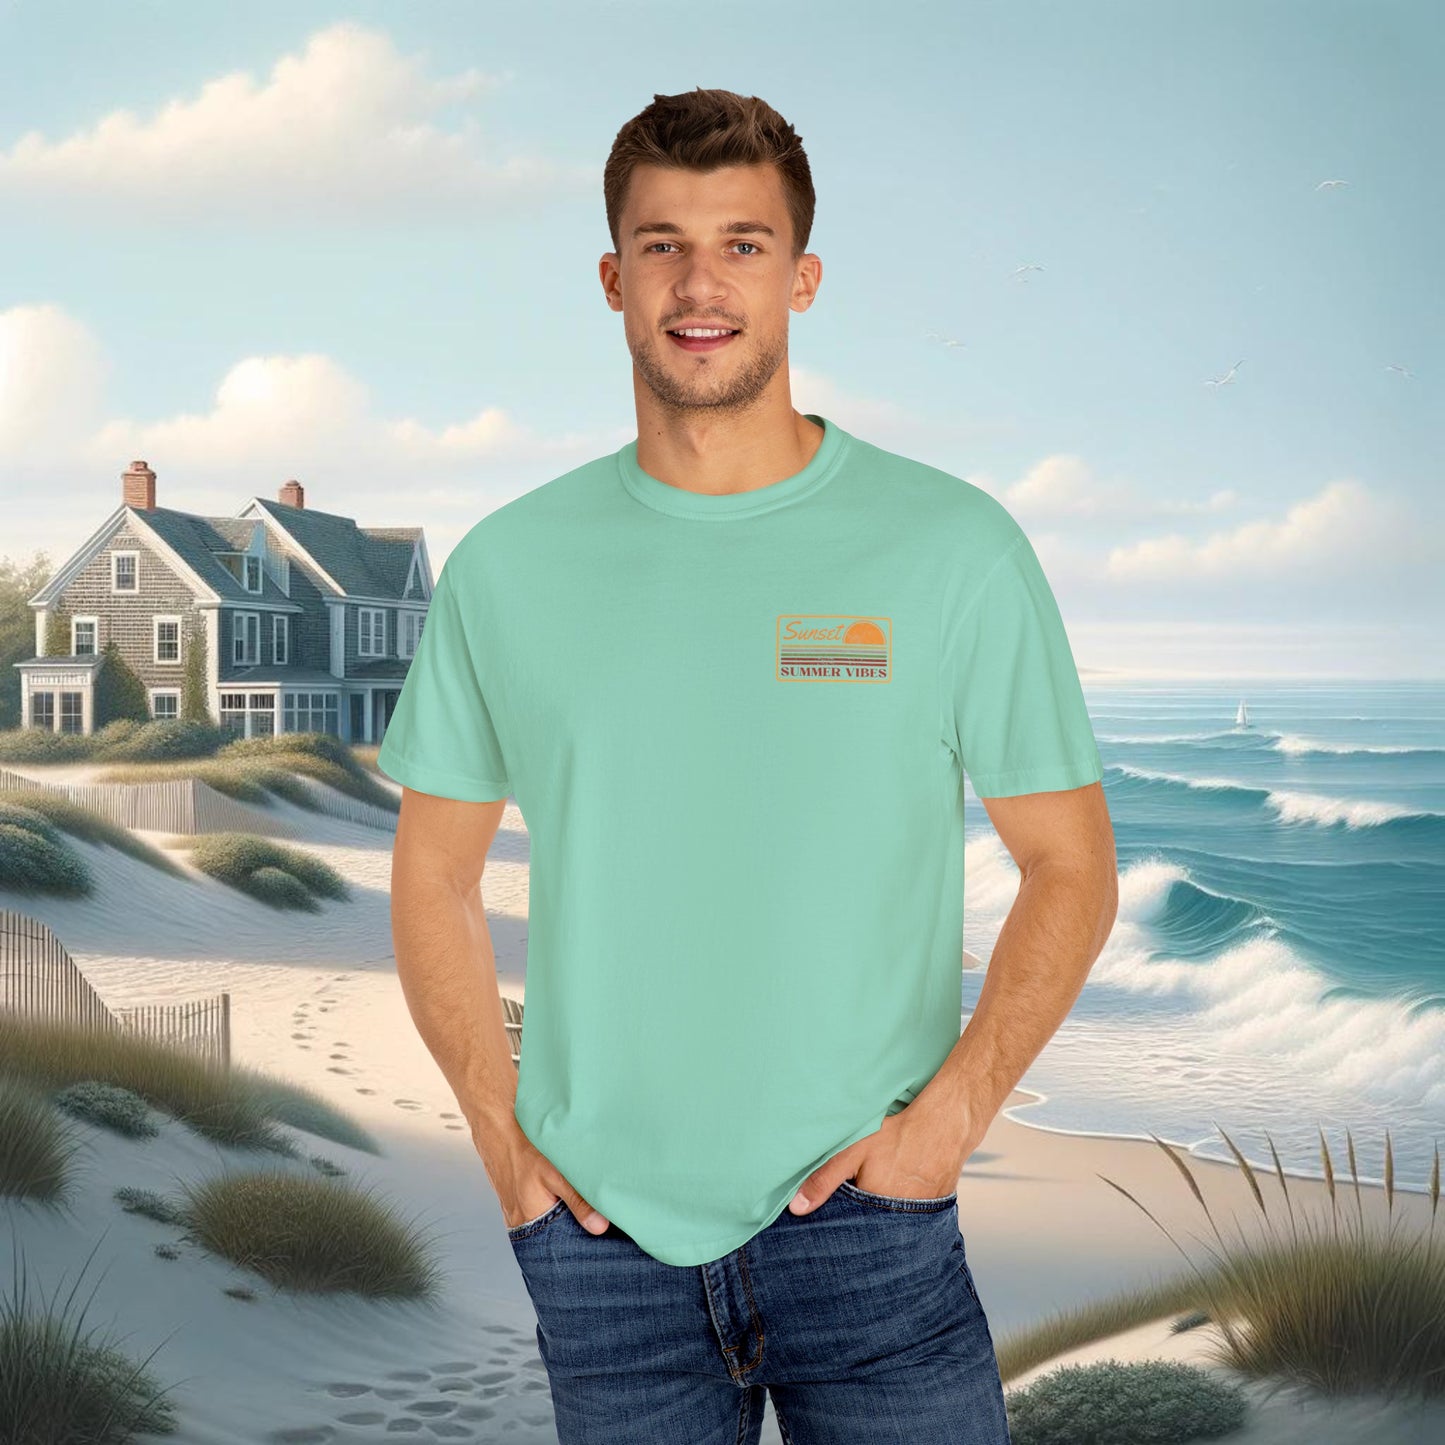 Summer Vibes Beachy T-Shirt - Comfort Colors 1717, 100% Ring-Spun Cotton, Relaxed Fit